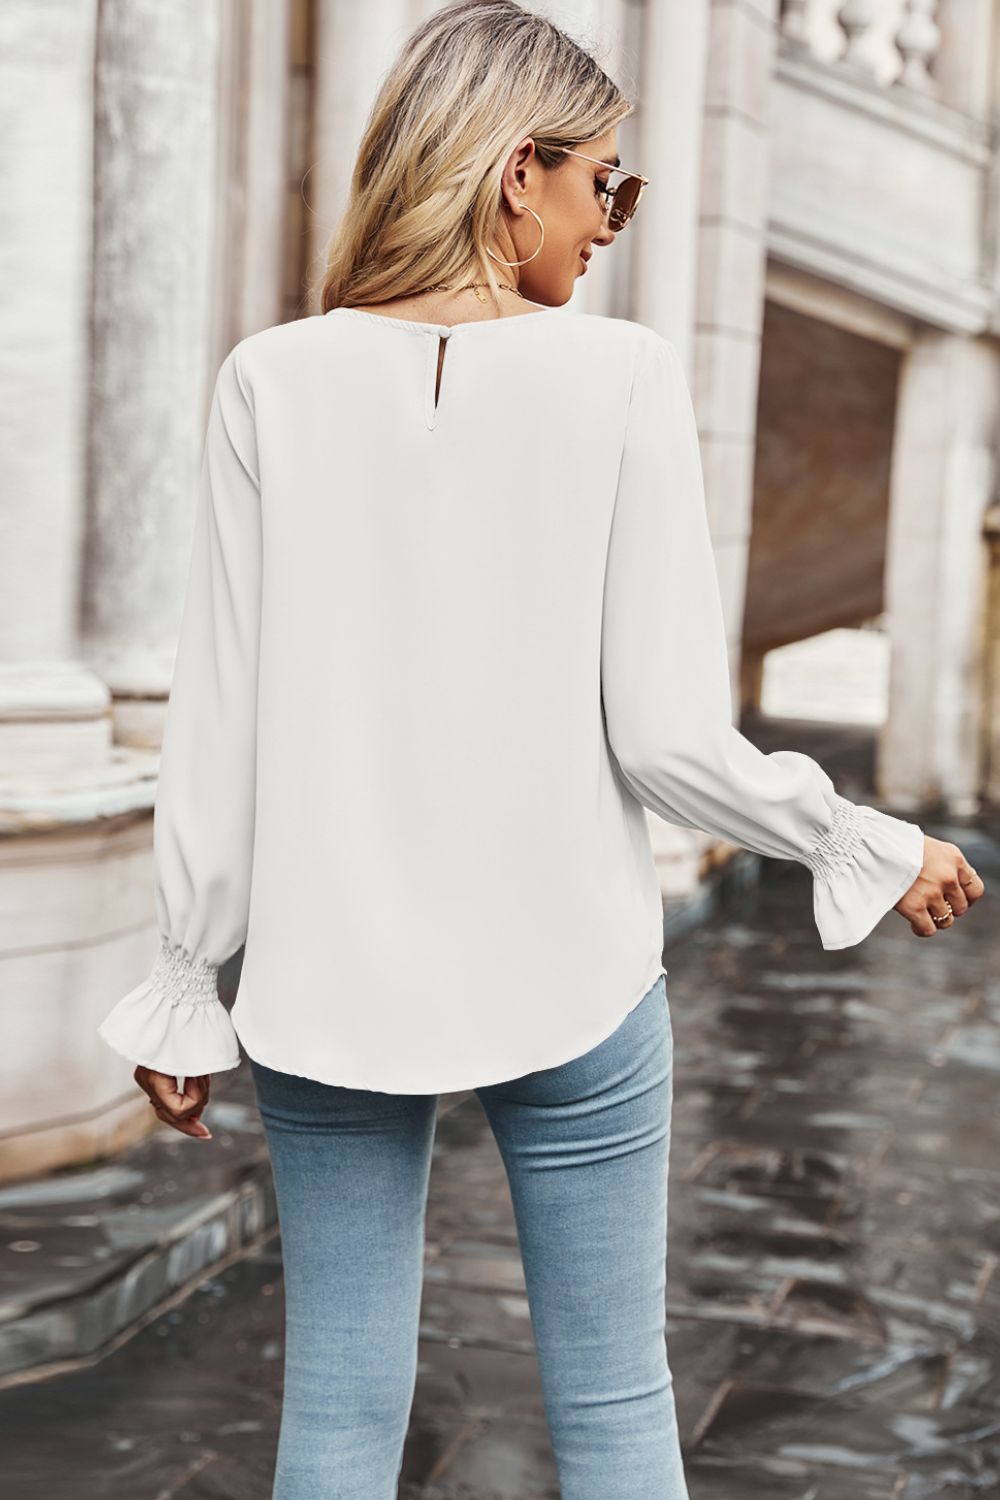 Women's White Colored Round Neck Long Flounce Sleeve Blouse with Smocked Wrists, Rounded Hem Line in Front and Back